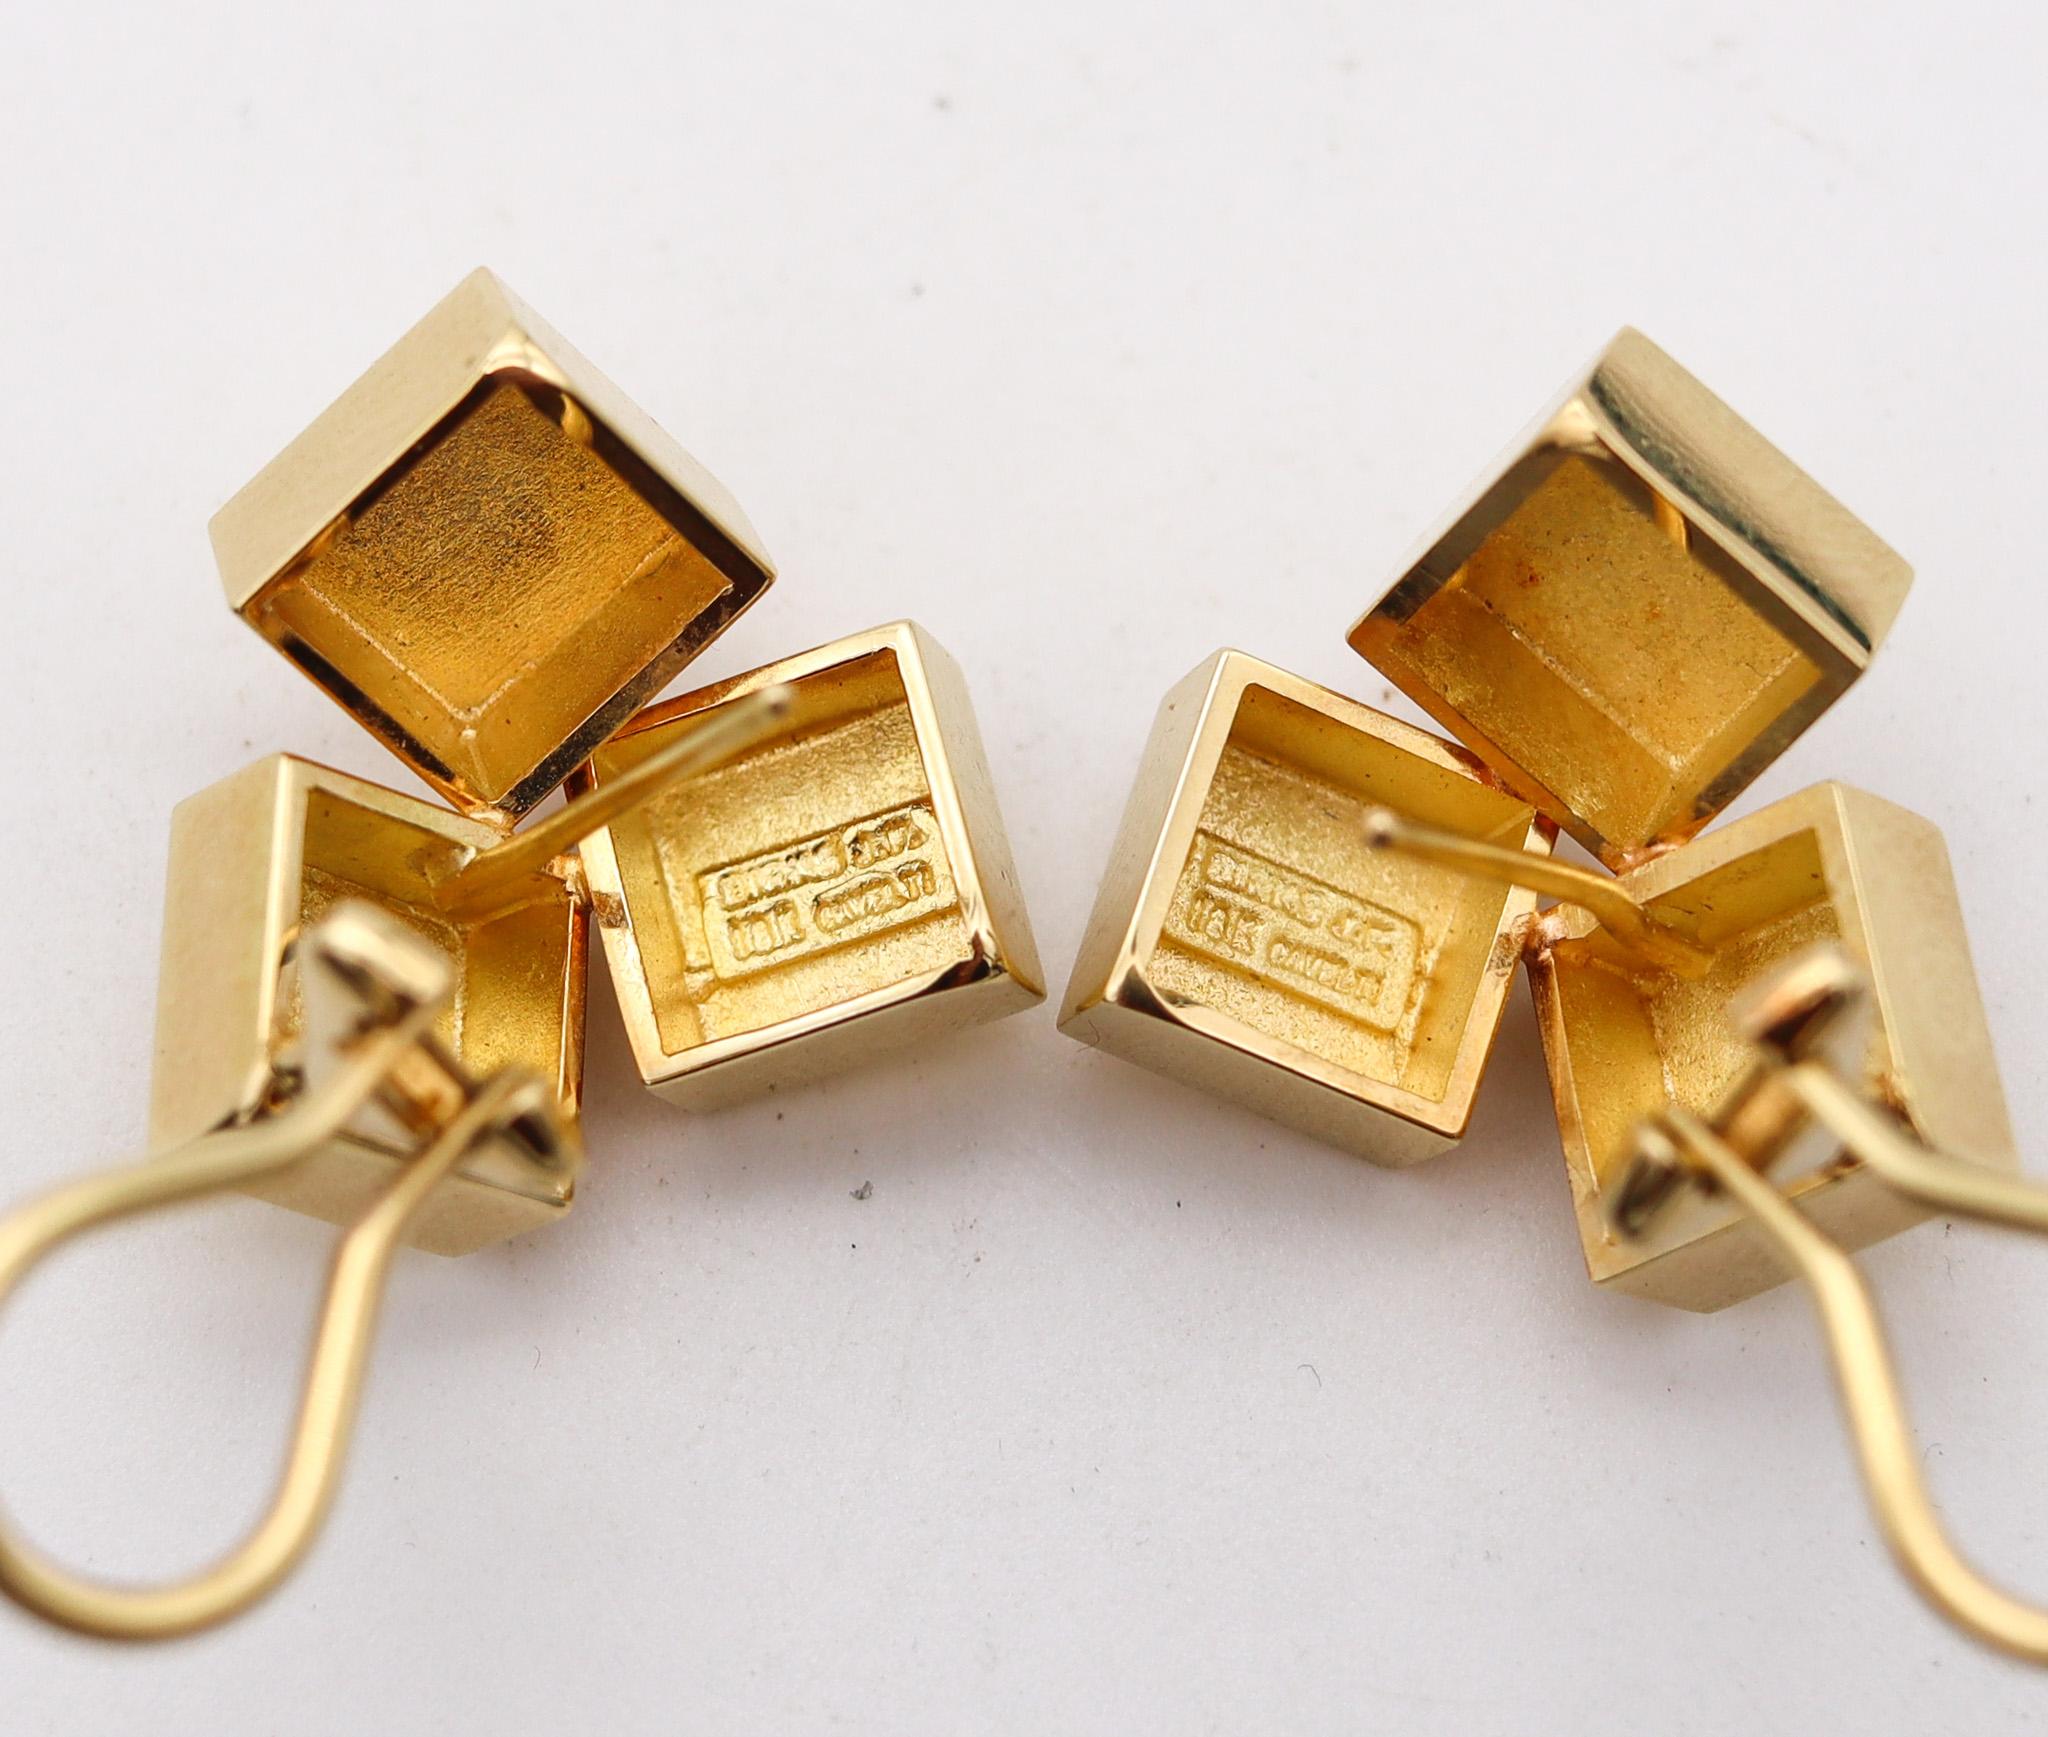 Antonio Cavelti 1970 For Birks Geometric Sculptural Earrings In 18Kt Yellow Gold In Excellent Condition For Sale In Miami, FL